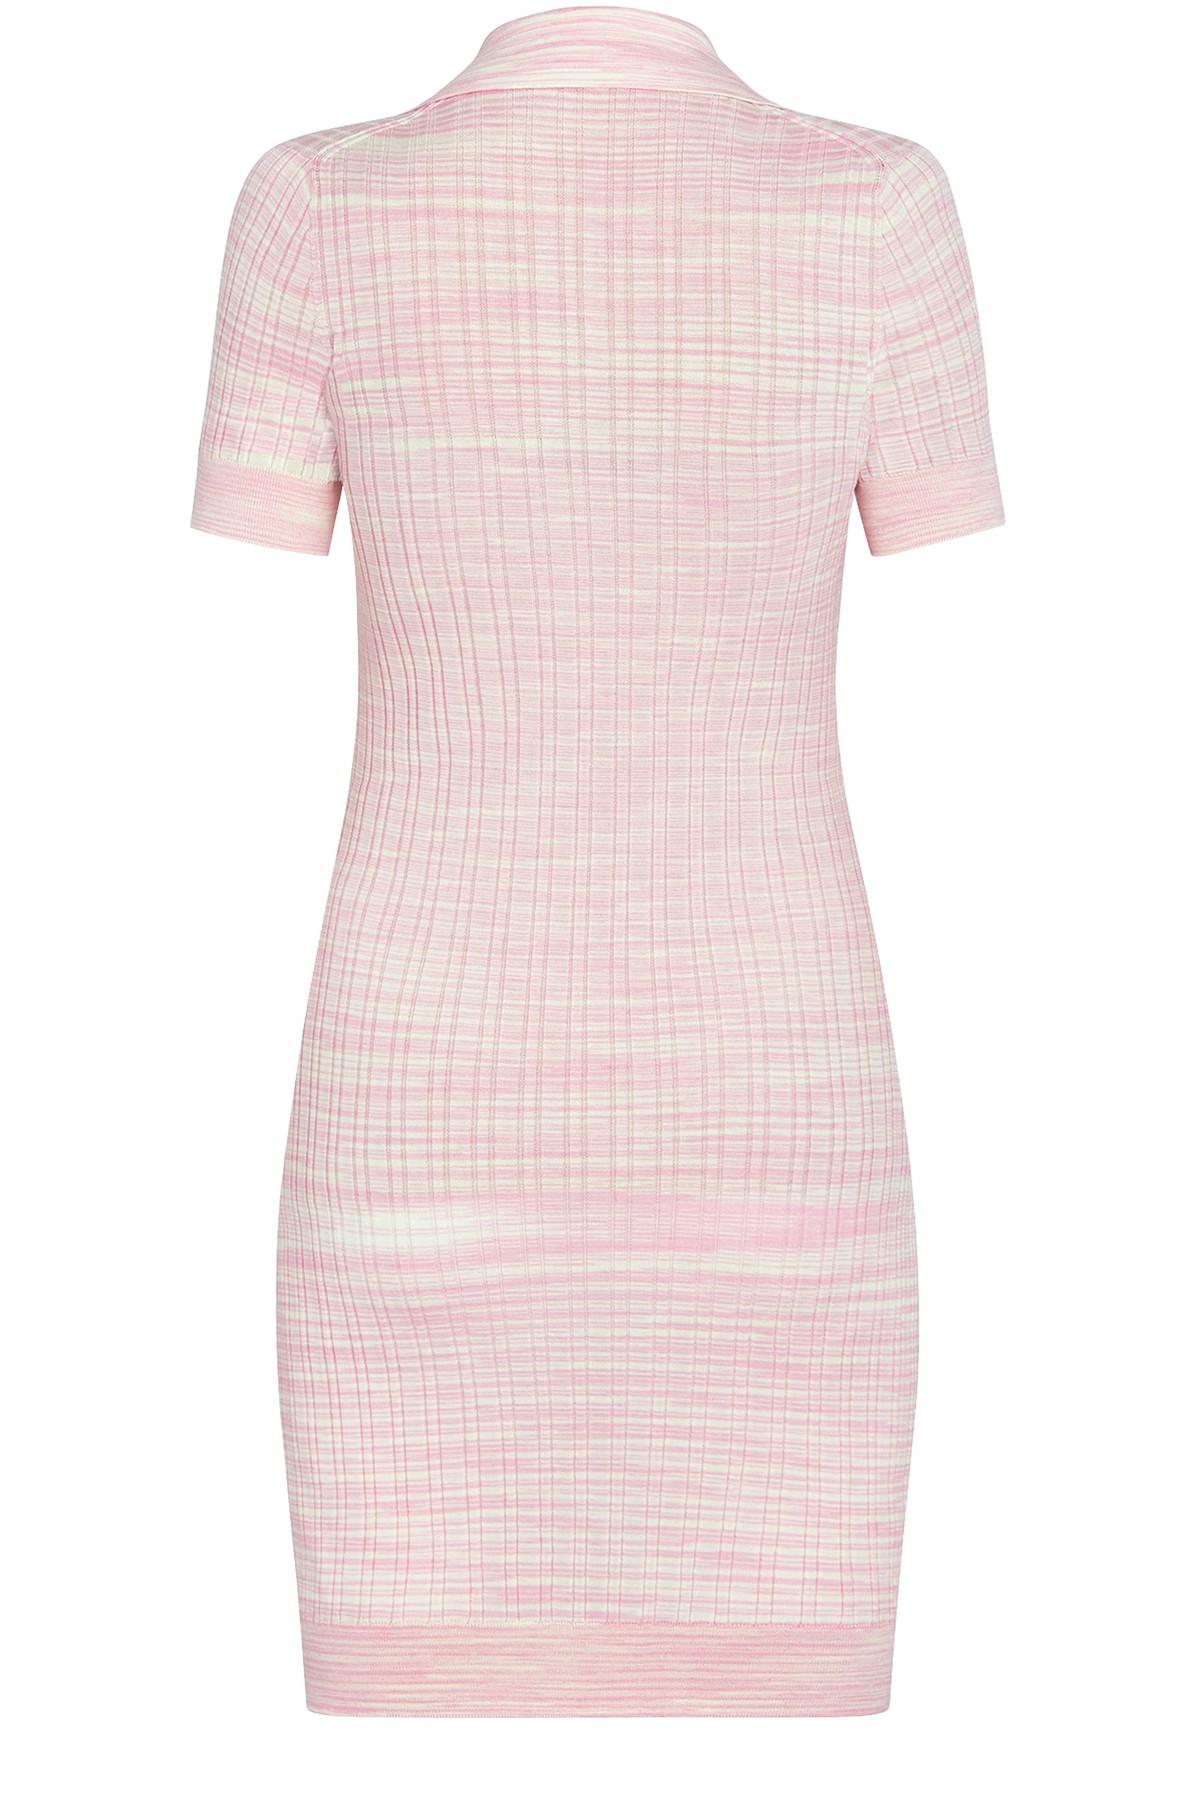 Mini dress Louis Vuitton Pink size 36 FR in Polyester - 23272119